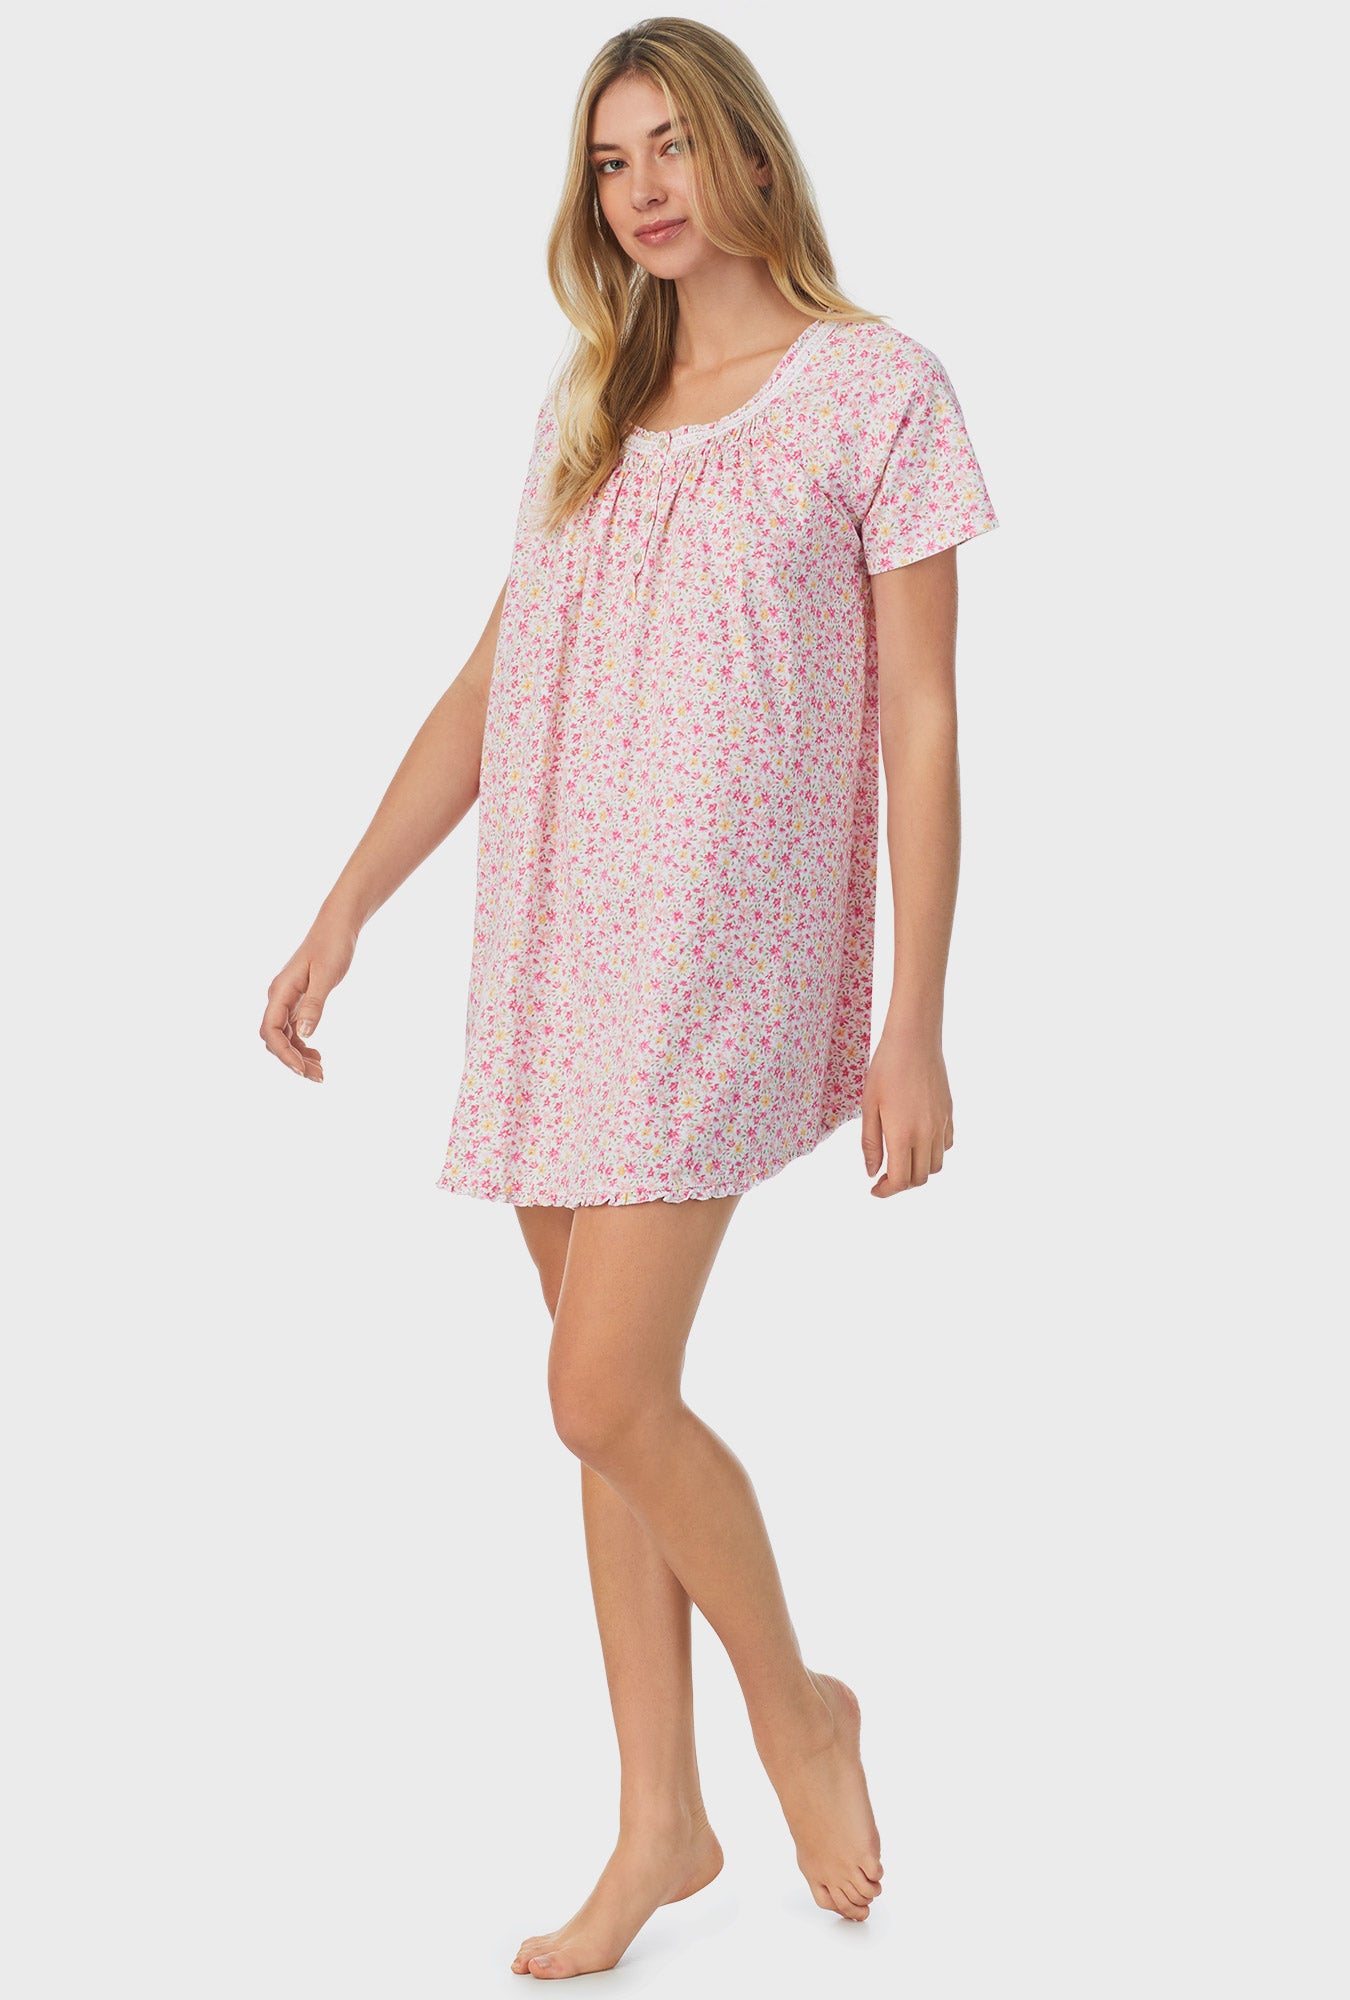 A lady wearing pink short sleeve short nightgown with spring disty print.